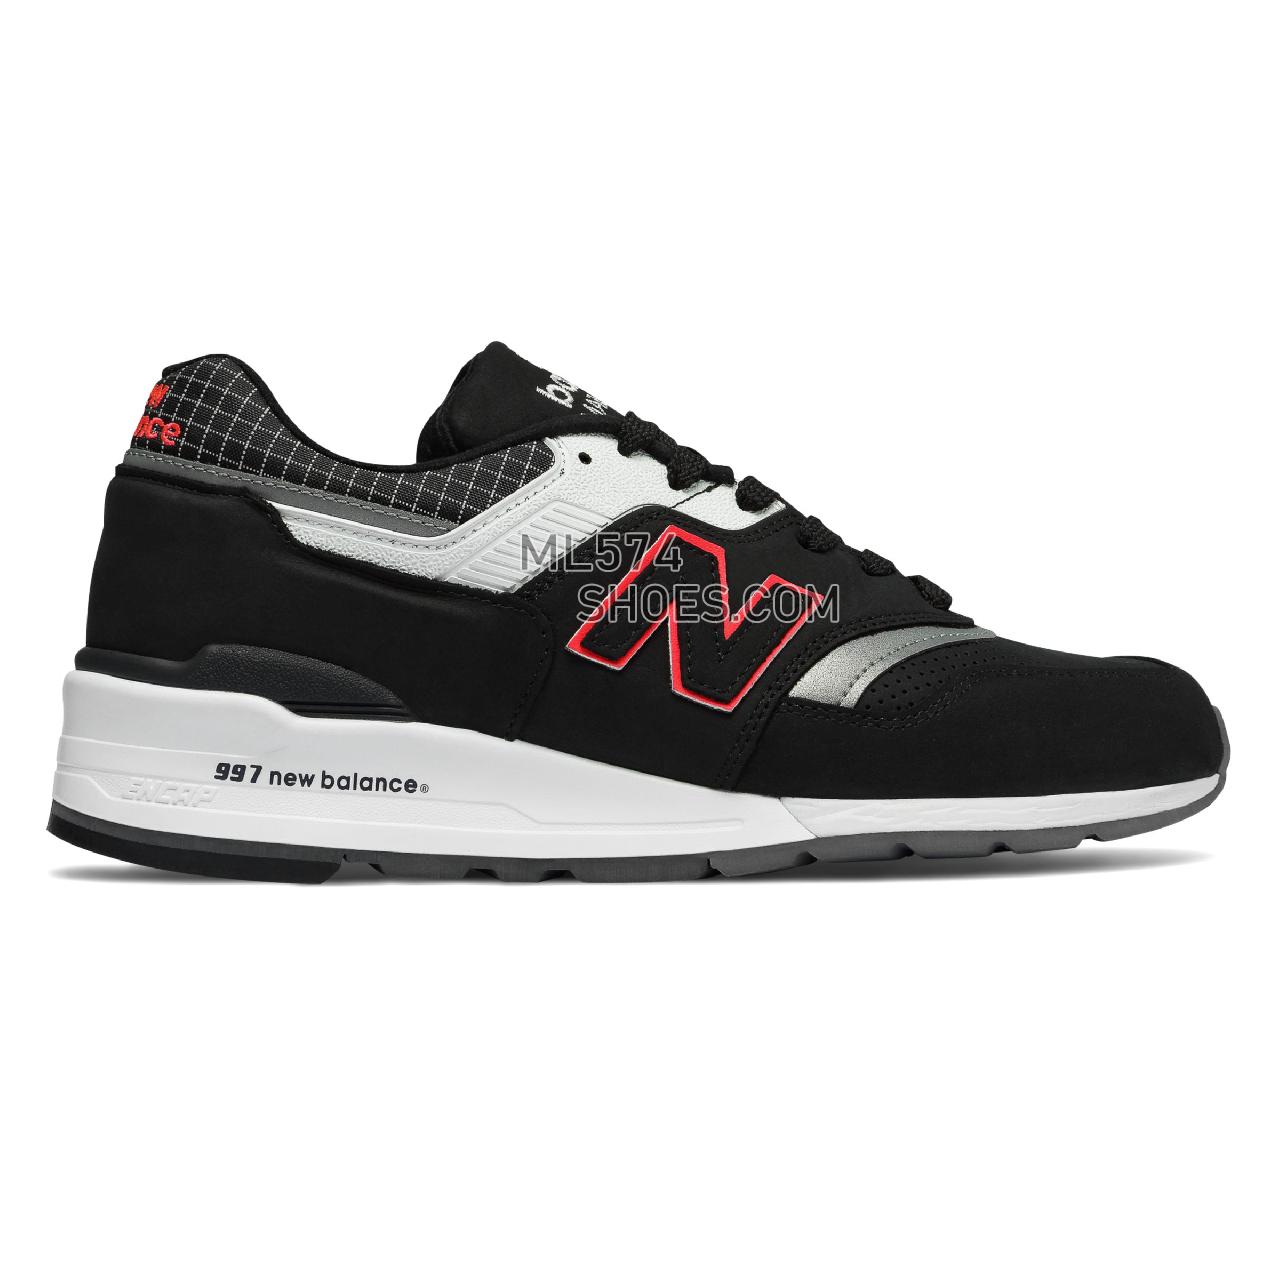 New Balance 997 Made in US Color Spectrum - Men's 997 - Classic Black with White and Red - M997CR